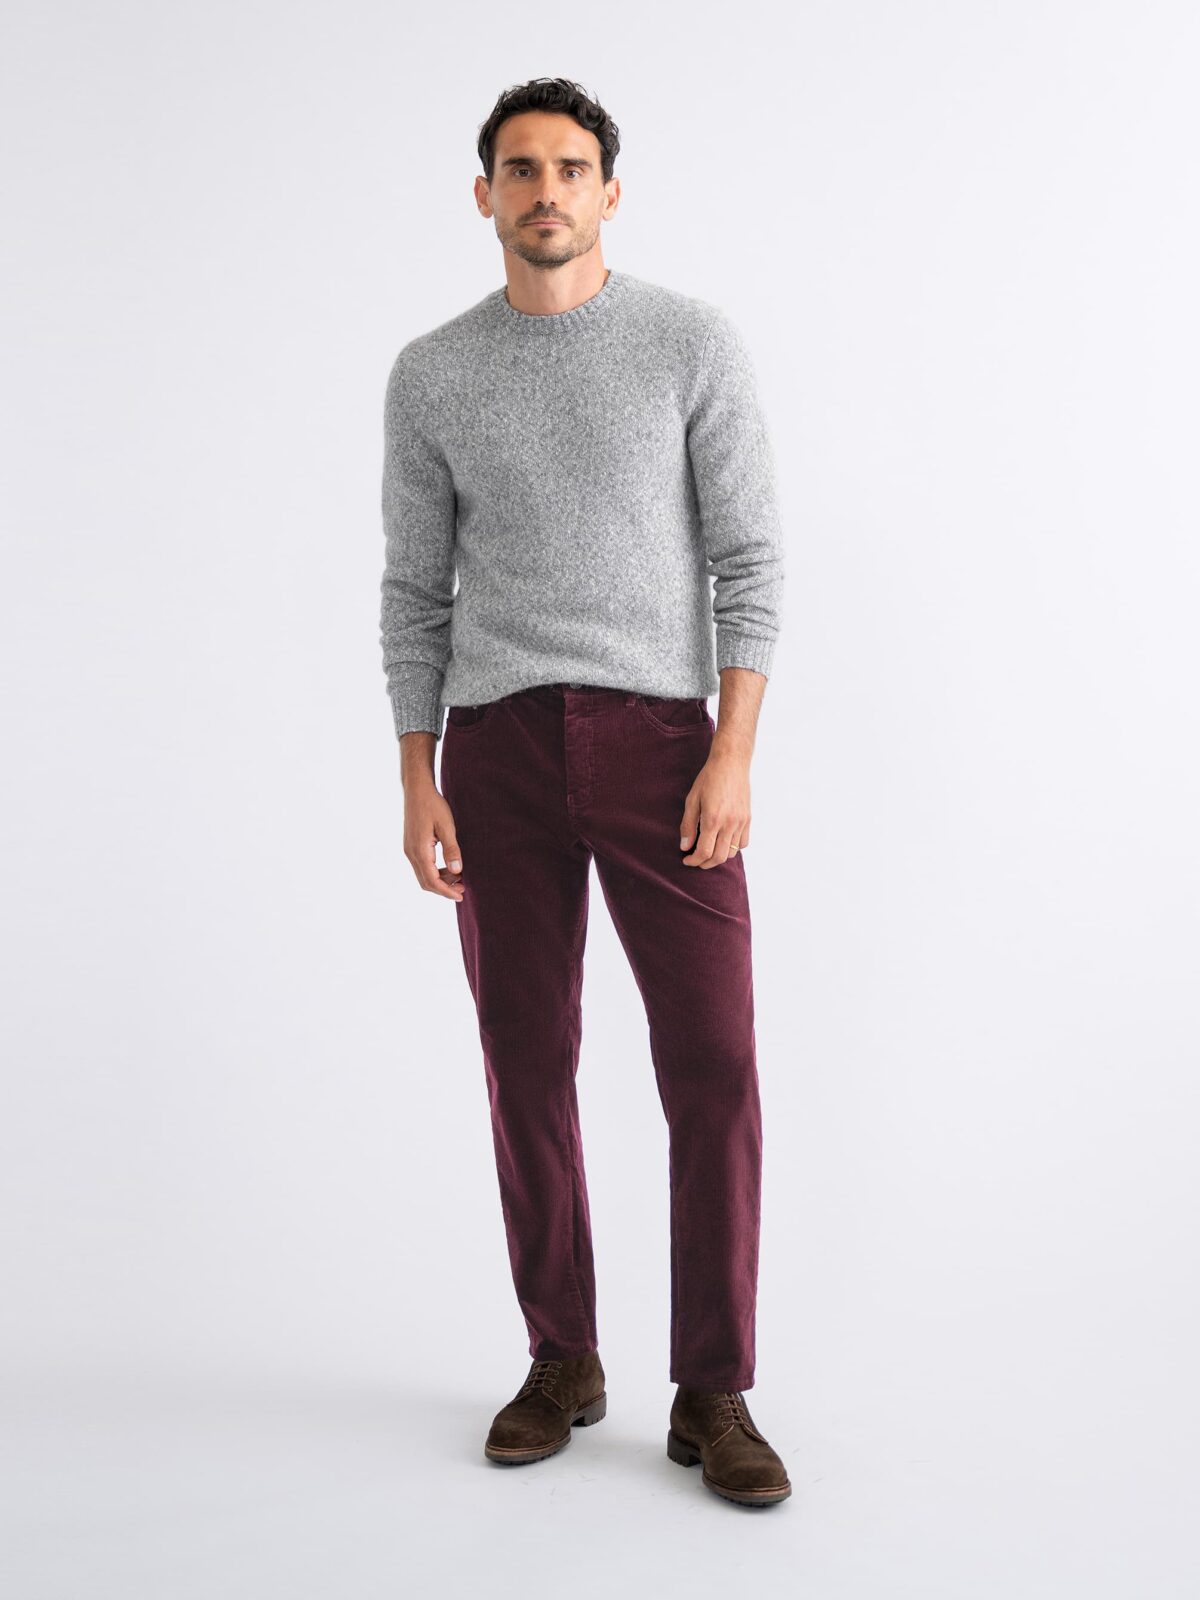 Dark Purple Corduroy Pants Outfits For Men (14 ideas & outfits